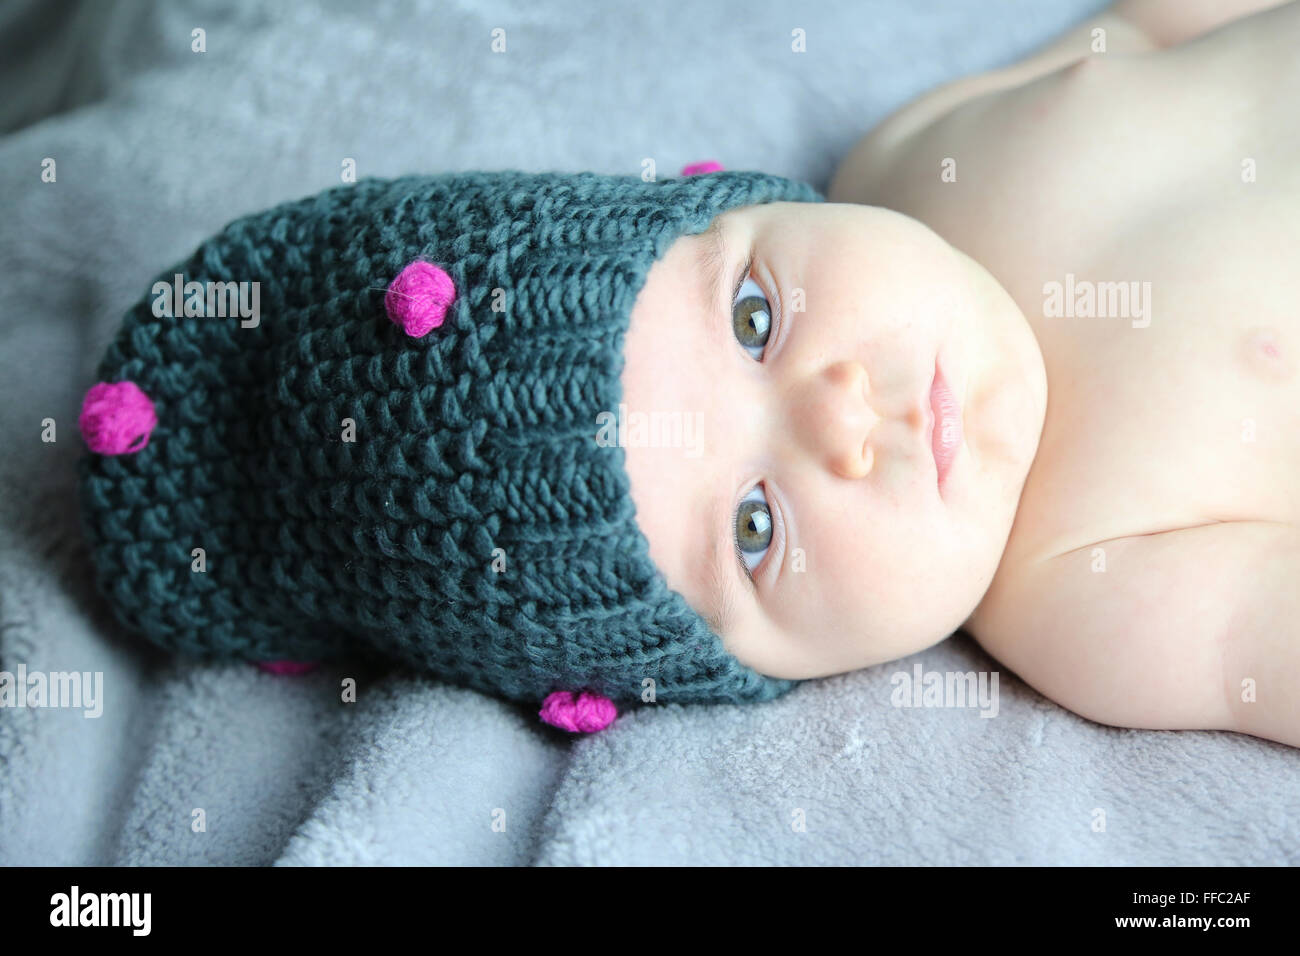 cute baby's portrait with chubby cheek's lying in bed while wearing a wool cap Stock Photo